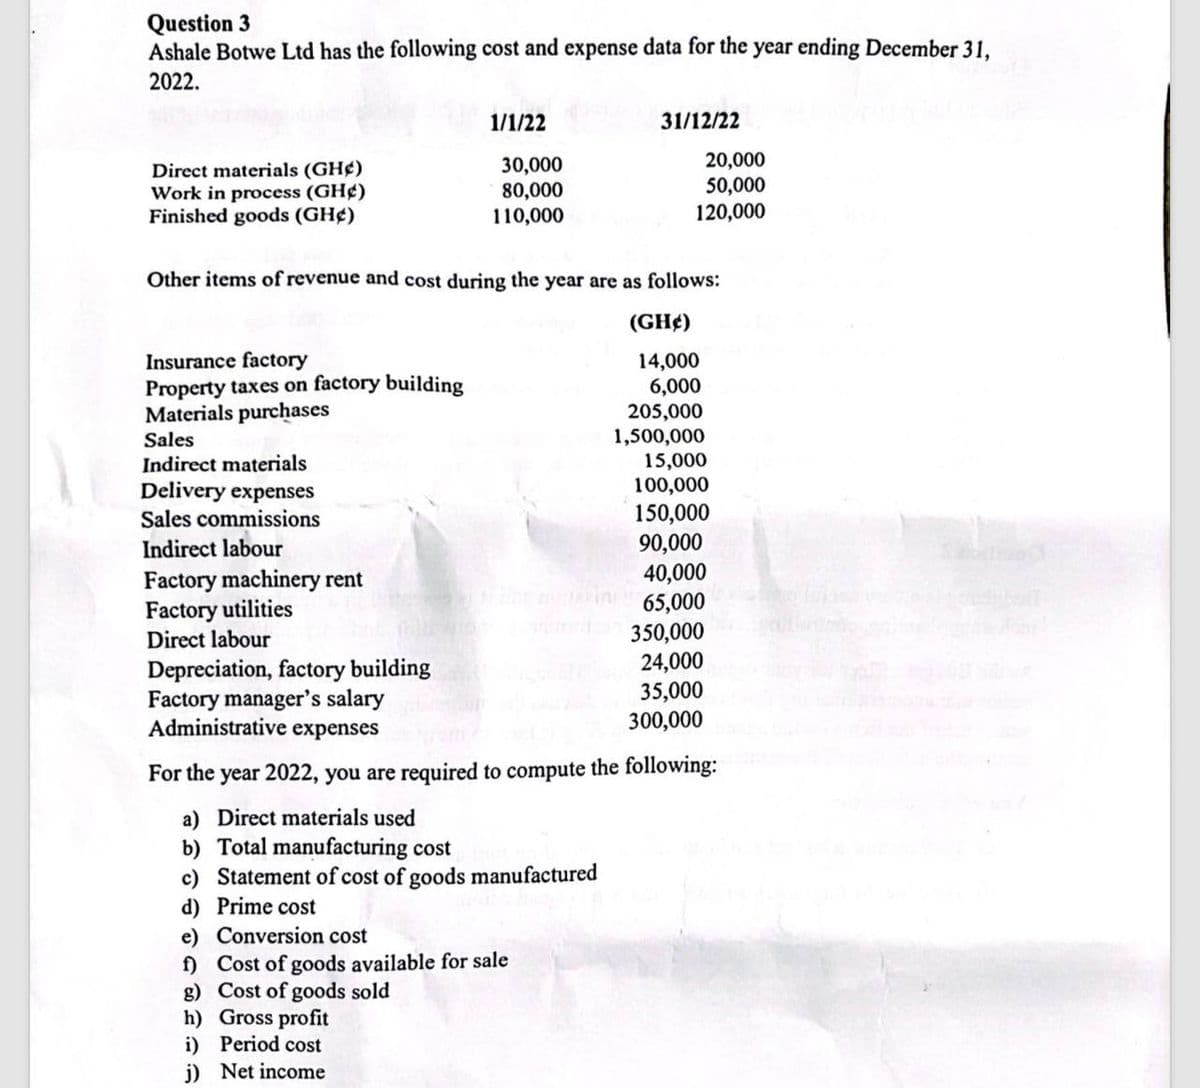 Question 3
Ashale Botwe Ltd has the following cost and expense data for the year ending December 31,
2022.
Direct materials (GHC)
Work in process (GH¢)
Finished goods (GH¢)
Insurance factory
Property taxes on factory building
Materials purchases
Sales
Indirect materials
Delivery expenses
Sales commissions
Indirect labour
1/1/22
Factory machinery rent
Factory utilities
Direct labour
30,000
80,000
110,000
Other items of revenue and cost during the year are as follows:
(GHC)
31/12/22
20,000
50,000
120,000
Direct materials used
b) Total manufacturing cost
c) Statement of cost of goods manufactured
d) Prime cost
e) Conversion cost
f) Cost of goods available for sale
g) Cost of goods sold
h) Gross profit
i)
Period cost
j) Net income
14,000
6,000
205,000
1,500,000
15,000
100,000
150,000
90,000
40,000
ARI 65,000
350,000
24,000
35,000
300,000
Depreciation, factory building
Factory manager's salary
Administrative expenses
For the year 2022, you are required to compute the following: